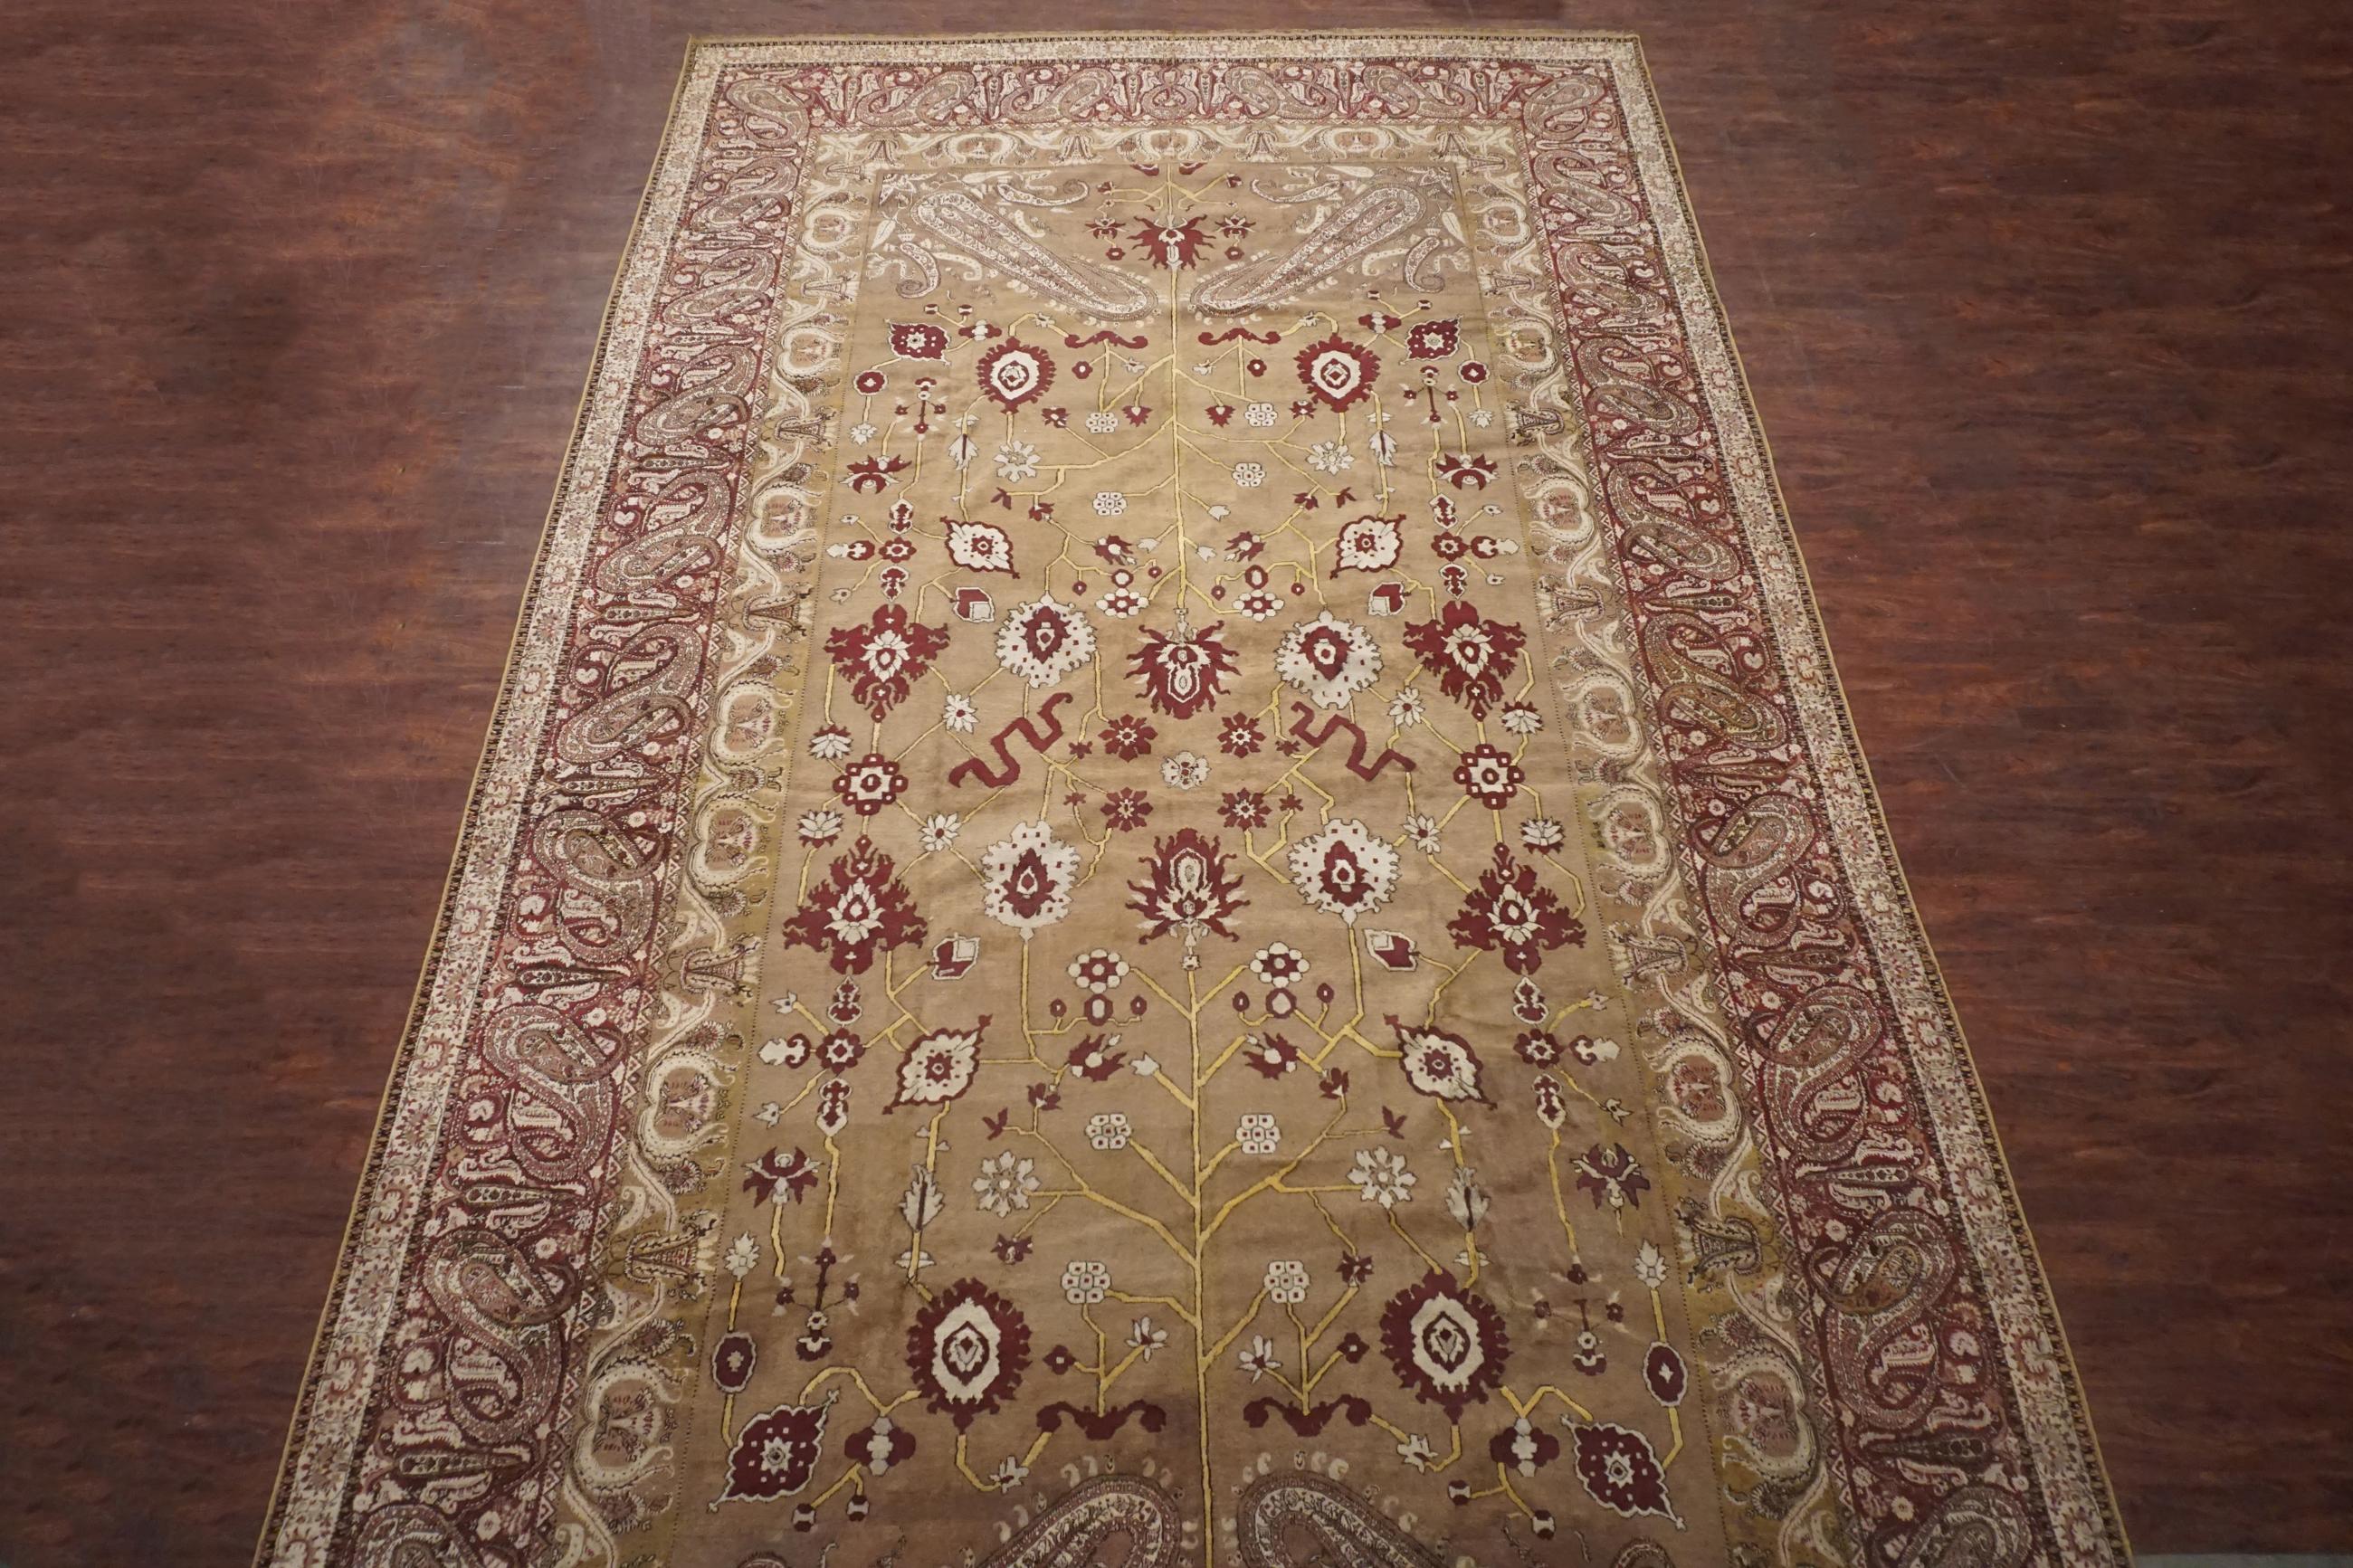 Indian Antique Agra Rug, circa 1890 In Excellent Condition For Sale In Laguna Hills, CA